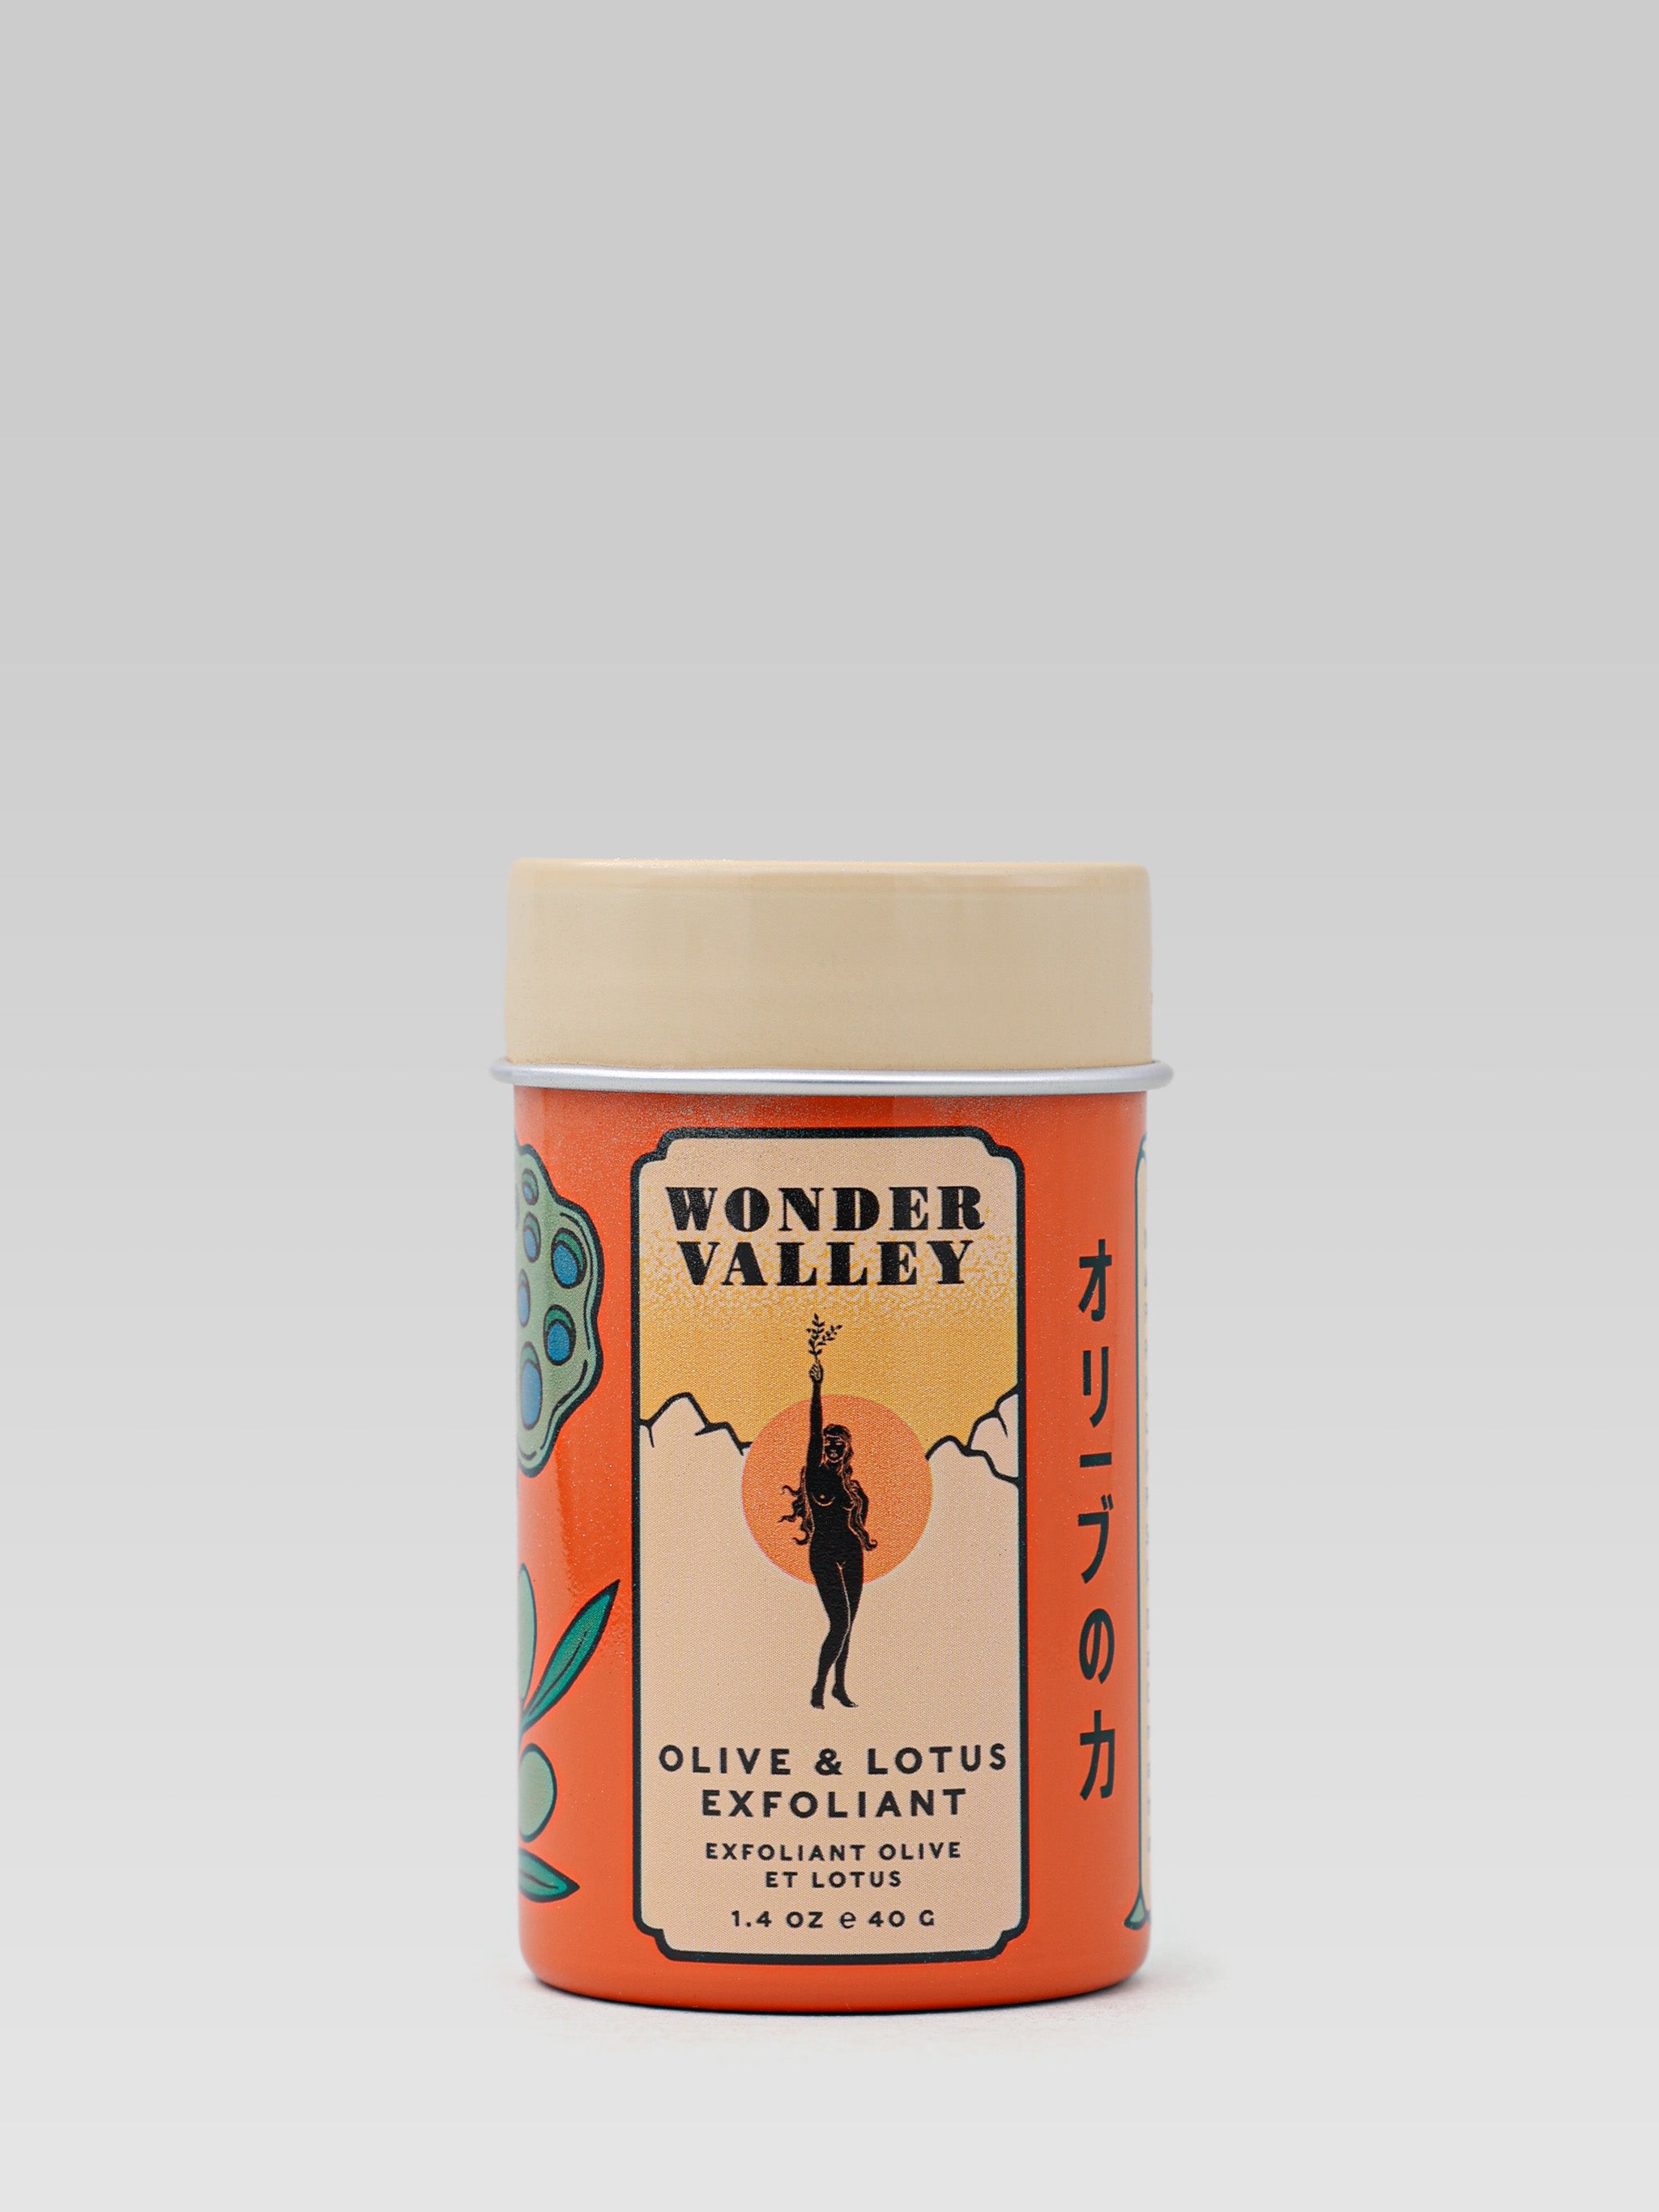 Wonder Valley Olive and Lotus Exfoliant product shot